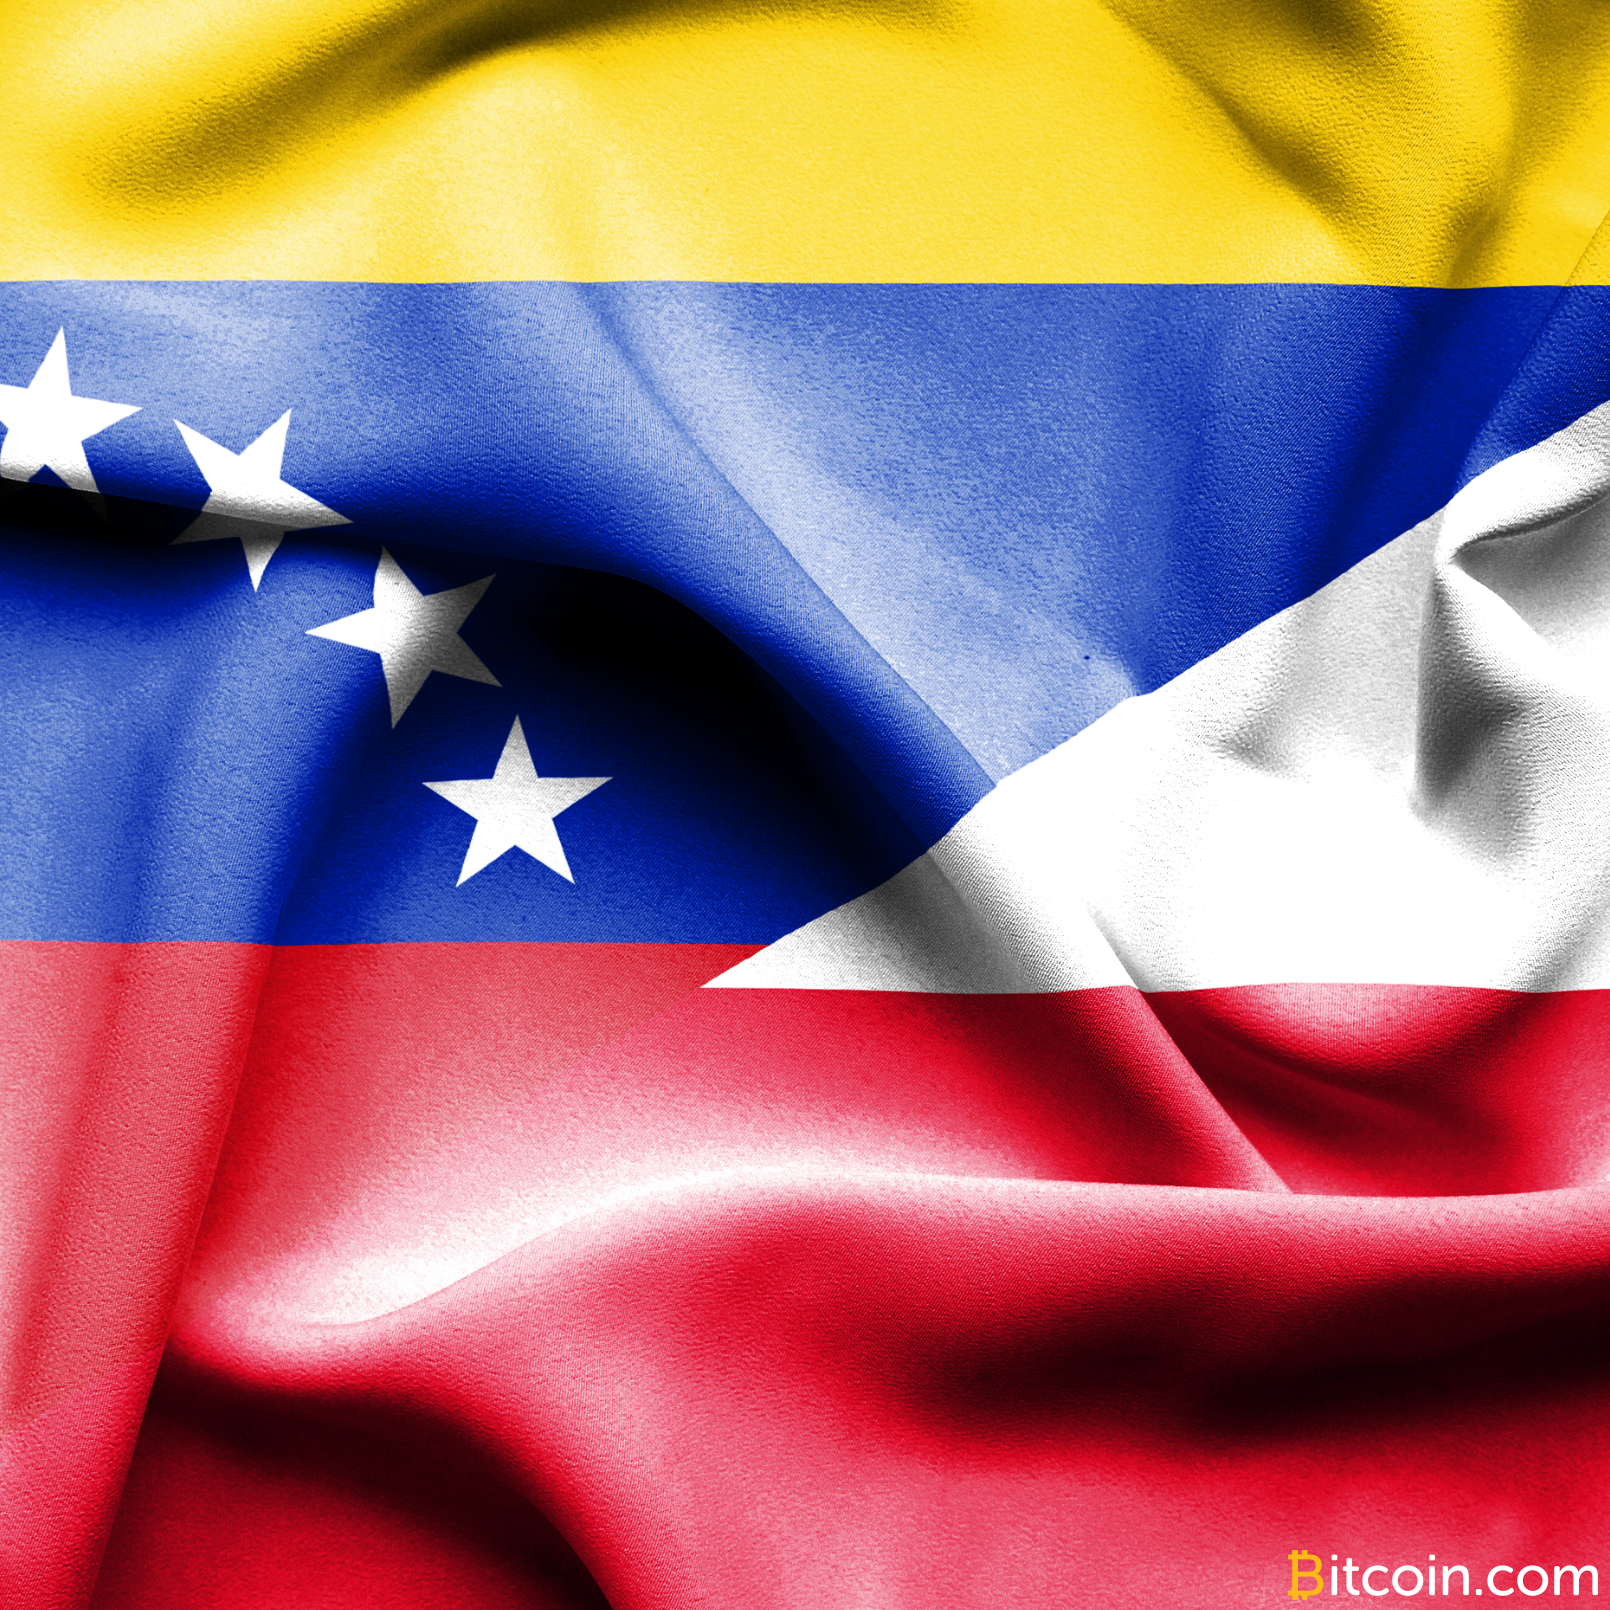 Poland Refutes Reports of Its Interest in Venezuela's Oil-Backed Cryptocurrency